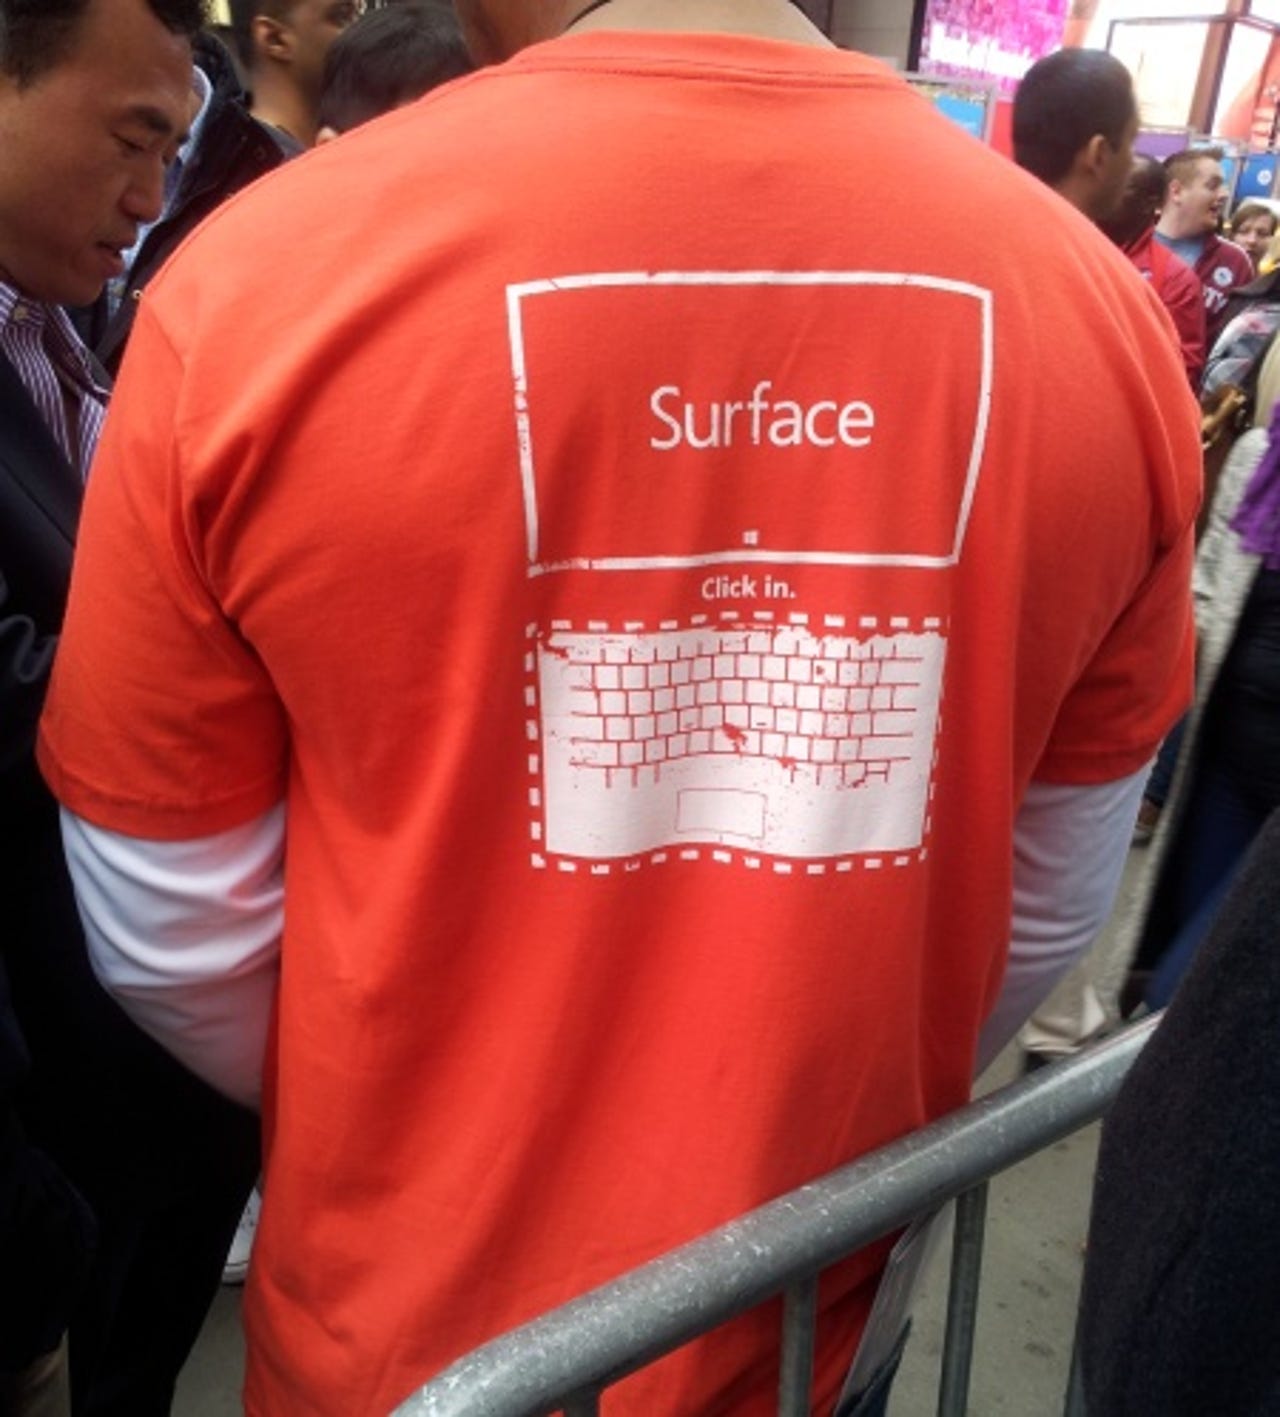 surface-tablet-nyc-2.jpg